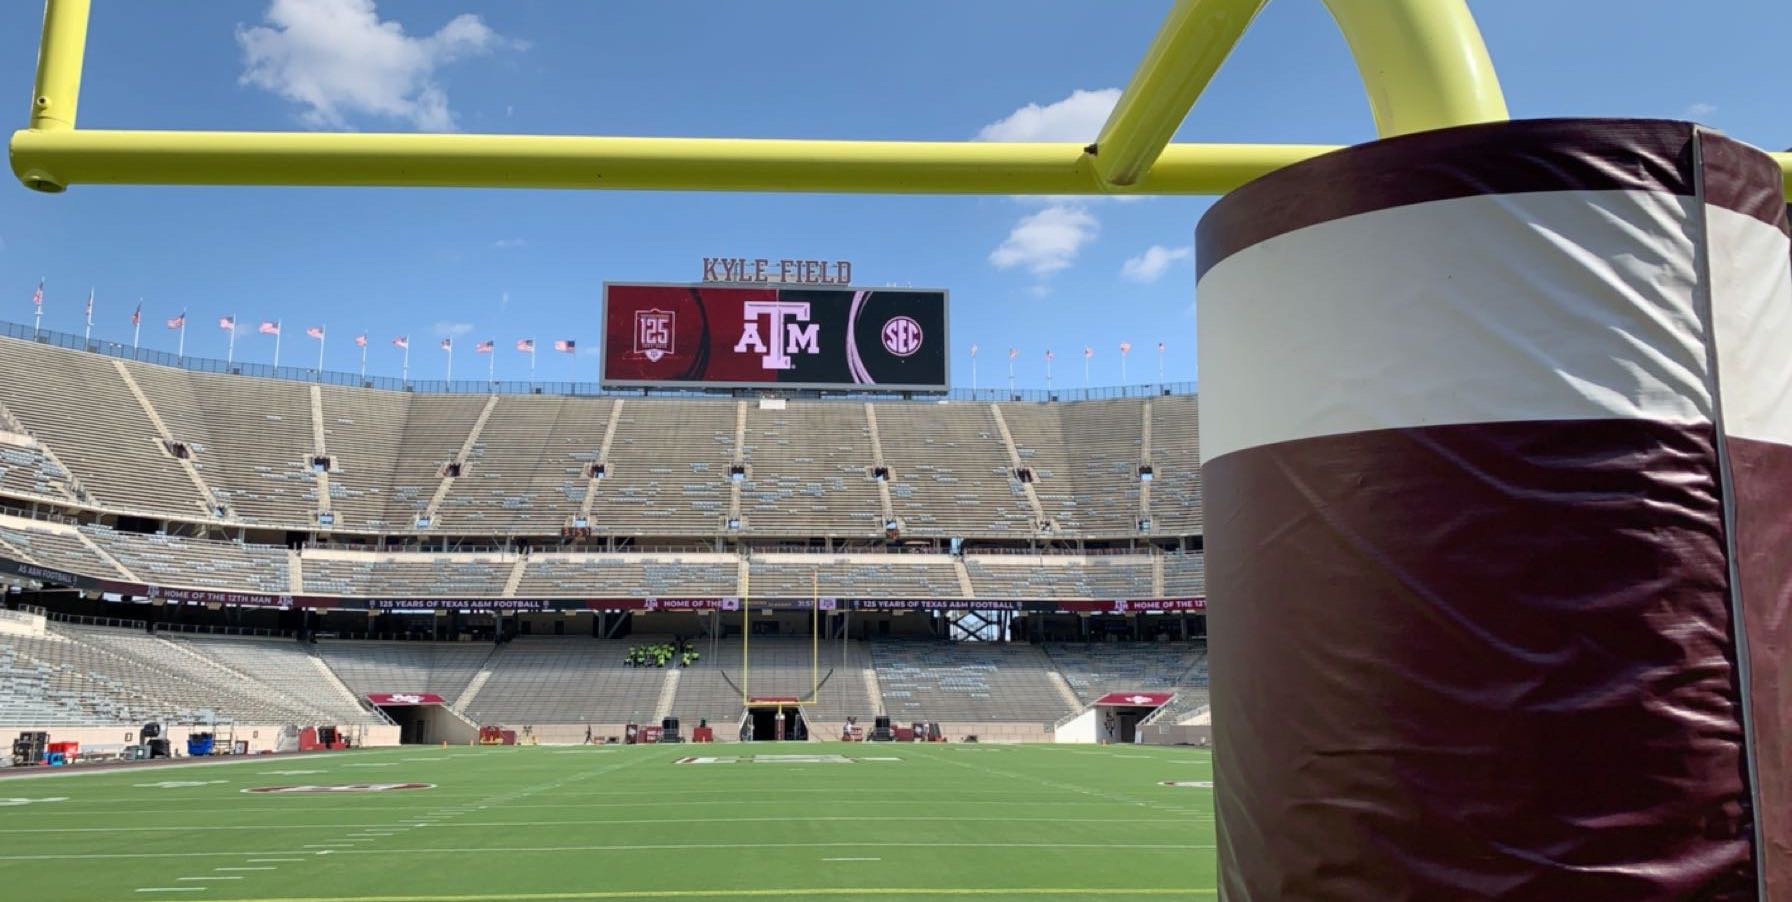 view of Kyle field stadium from behind the goal post.